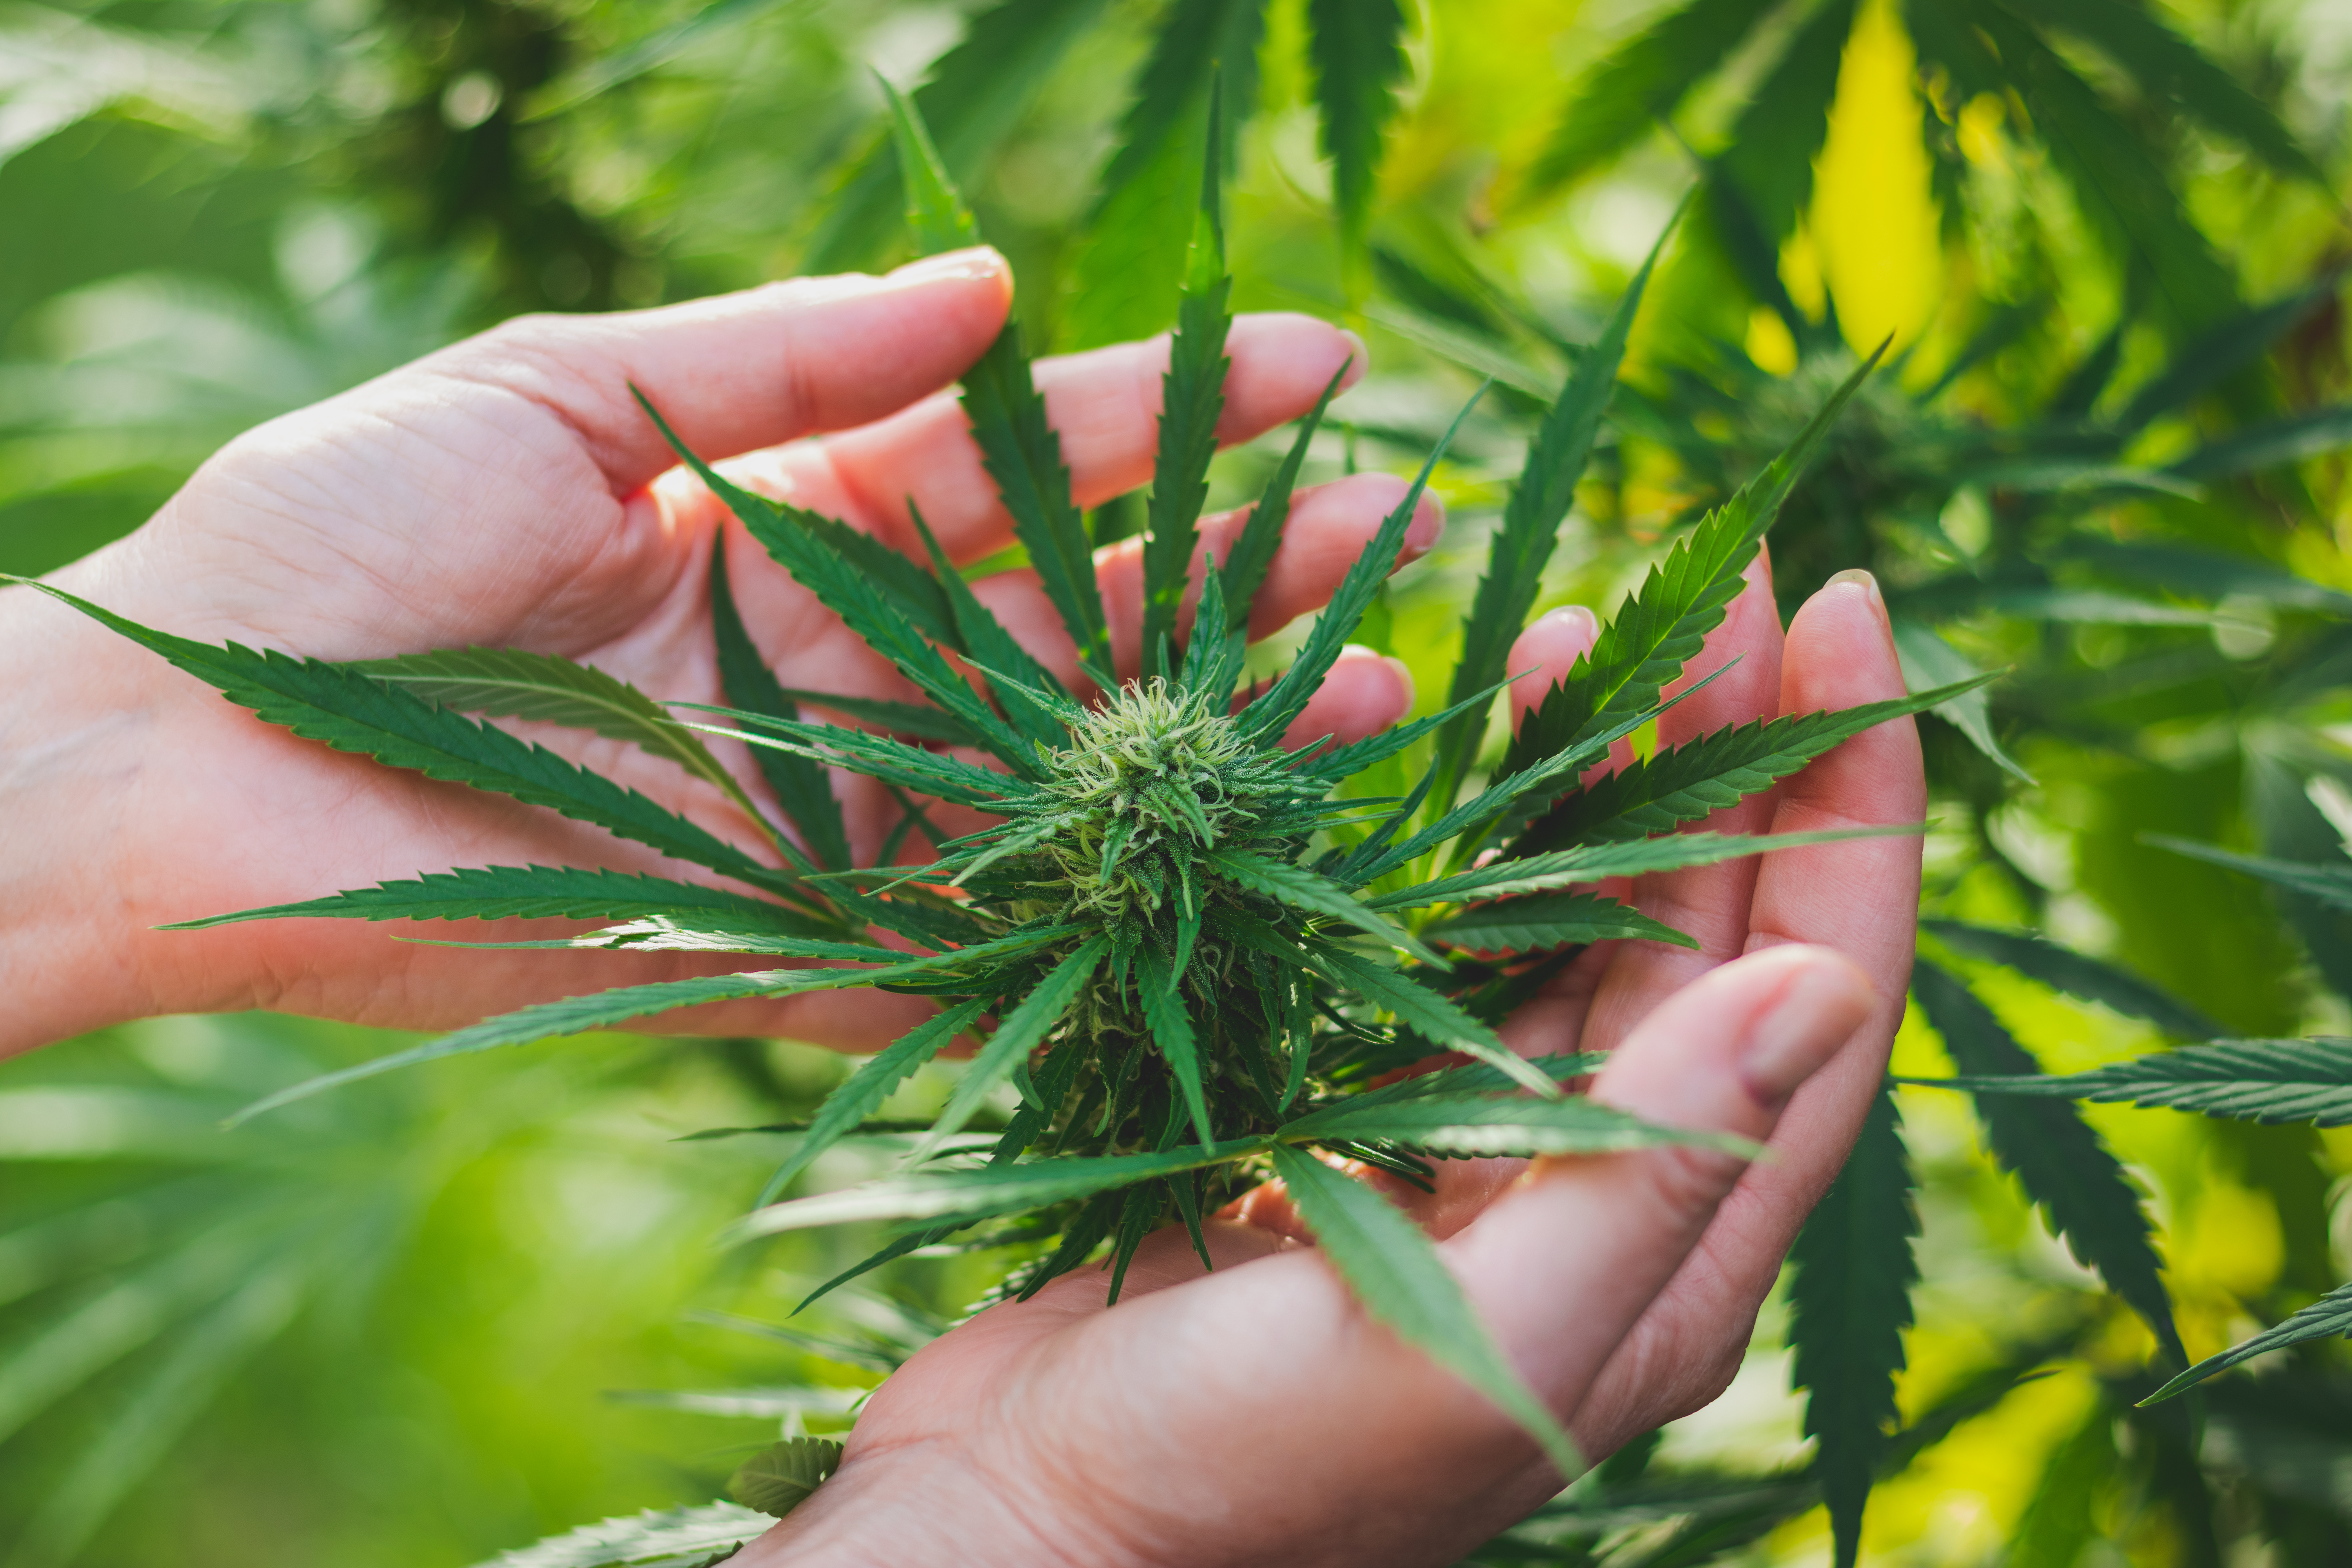 How to Invest in Cannabis as the Industry Matures